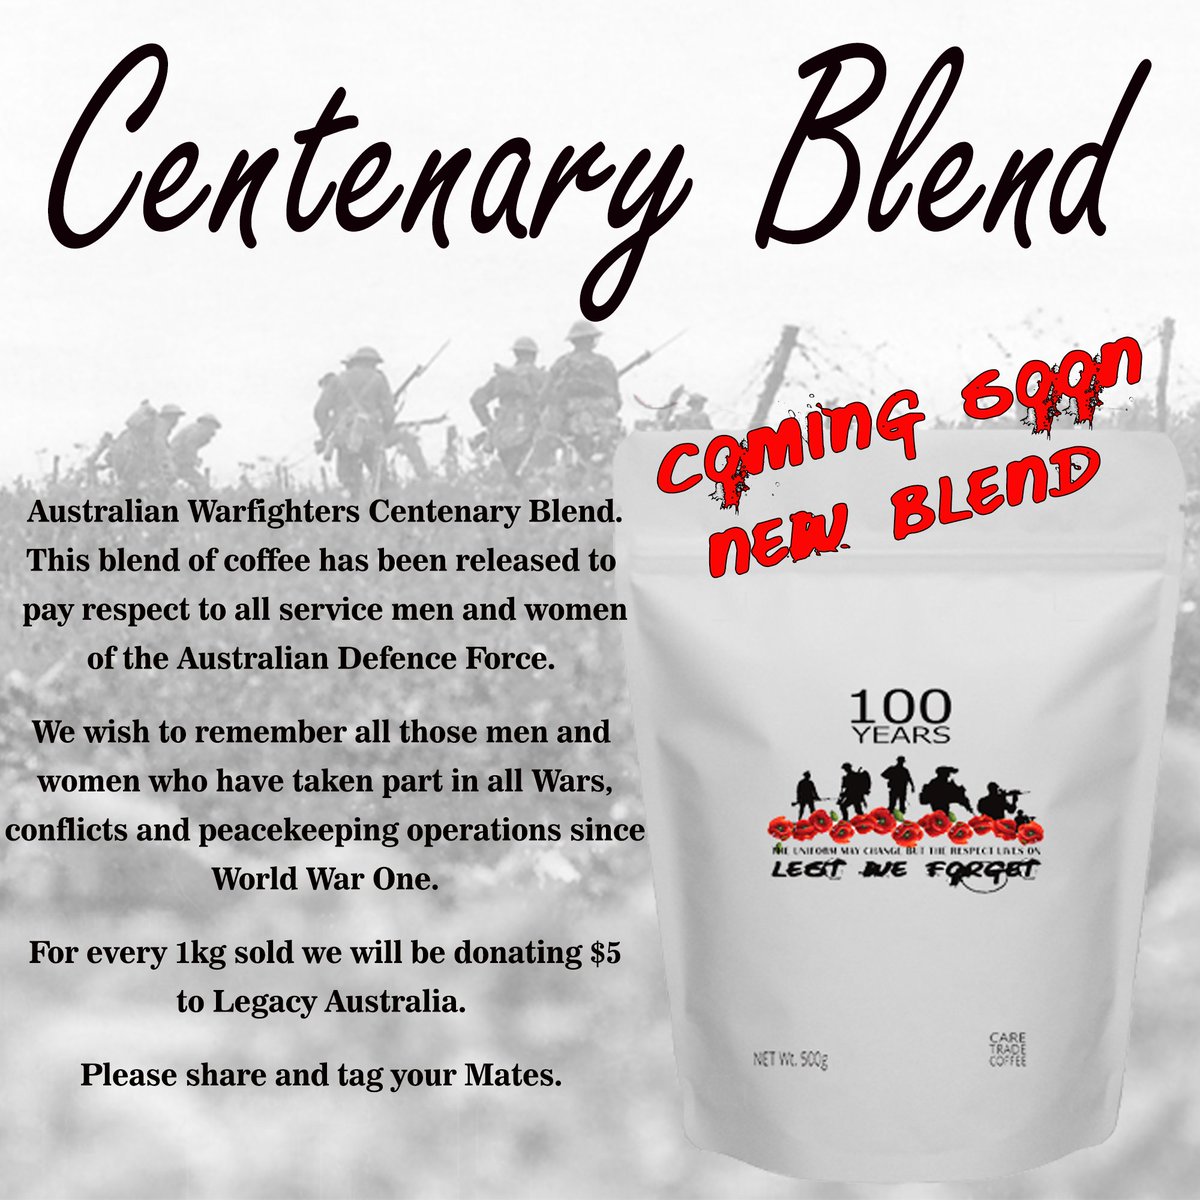 Remember all australianwarfighters.com Coffee sold we use the money to retrain our Veterans or family members or Veterans as Baristas. Nothing beats a hard day with a Great Brew. #auspol @AusGov @kochie_online